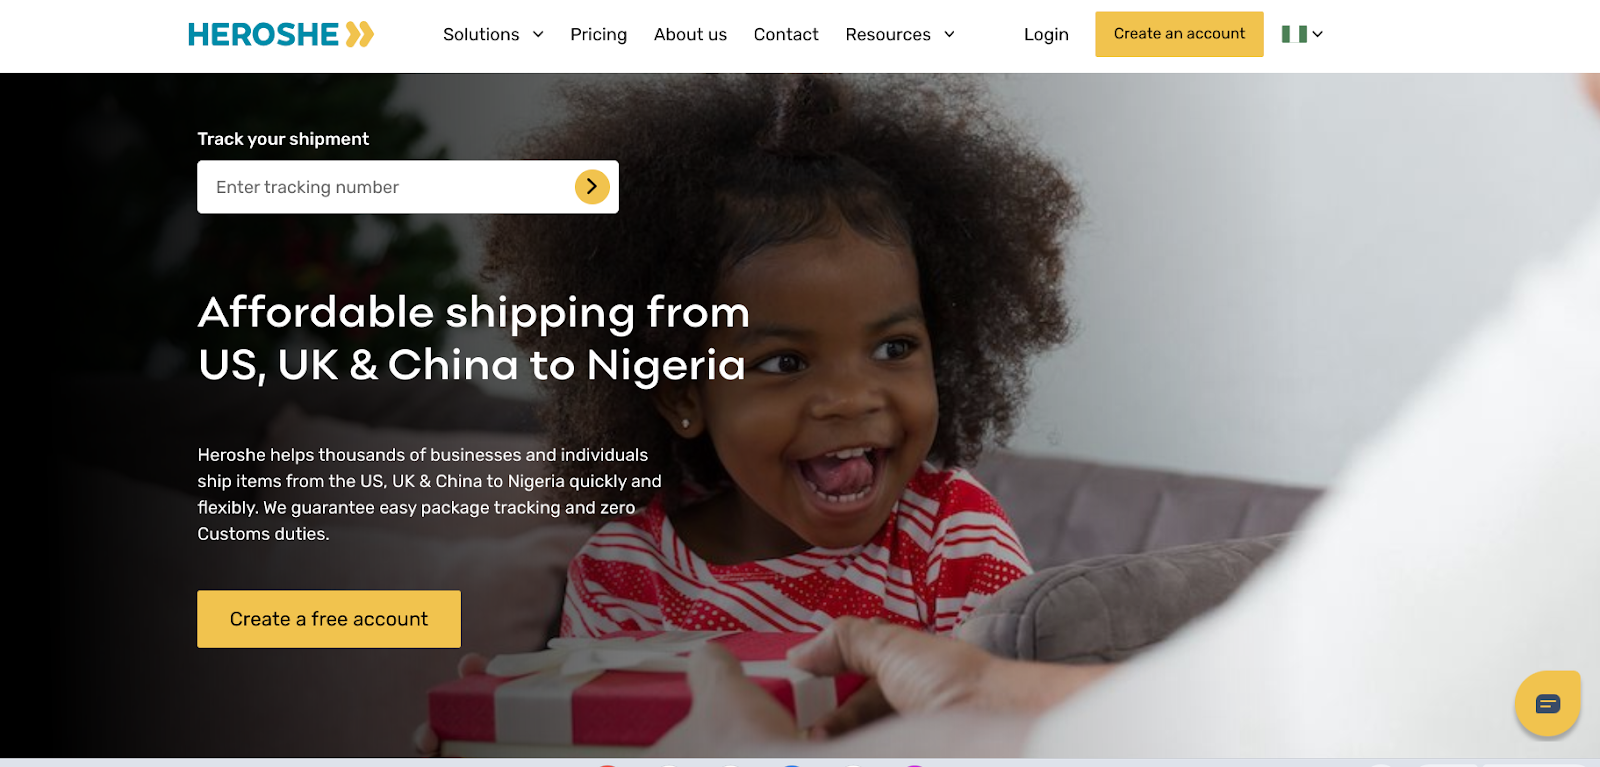 Affordable shipping from the US, UK & China to Nigeria